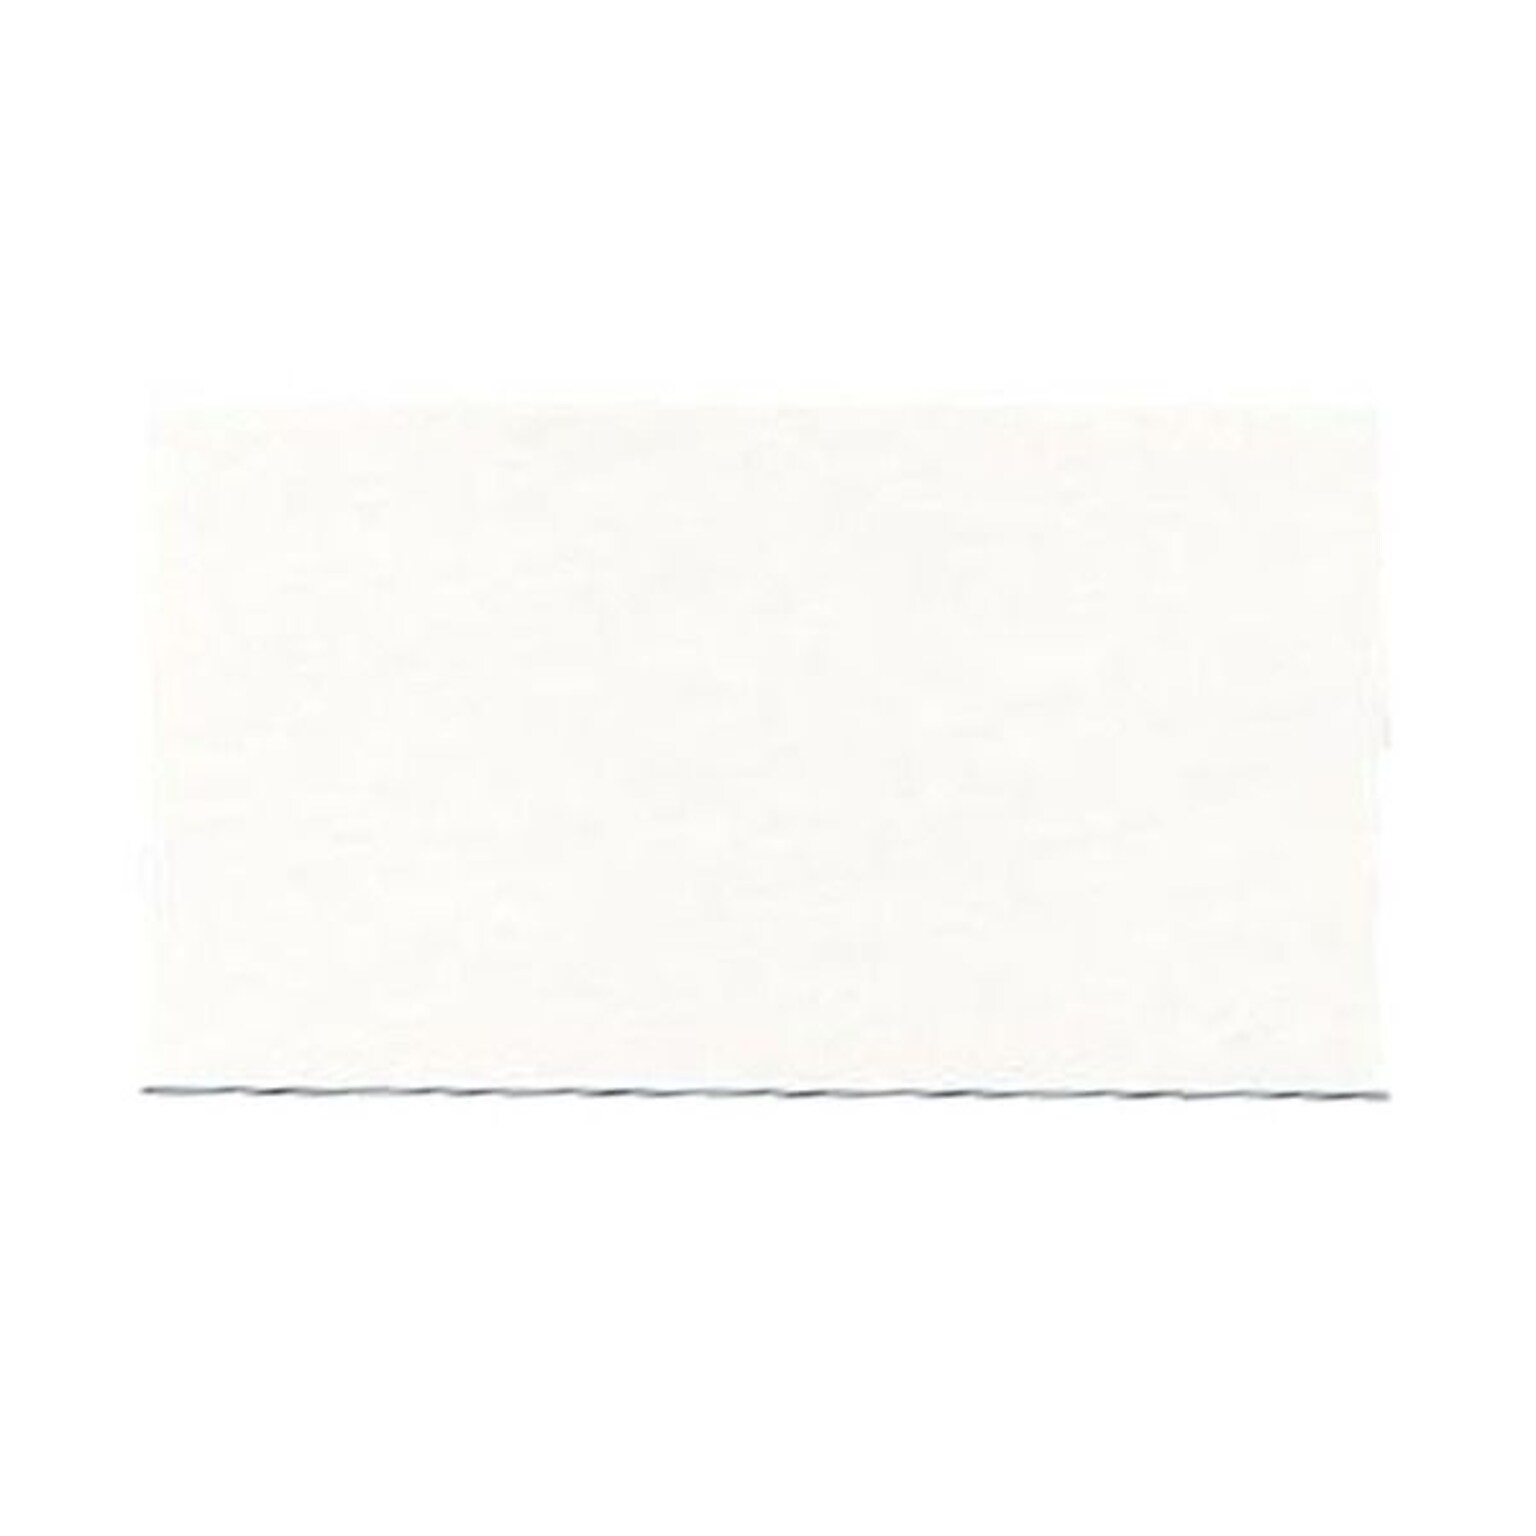 JAM Paper® Blank Note Cards, 3drug size, 2 x 3.5, White, 100/pack (11756574)